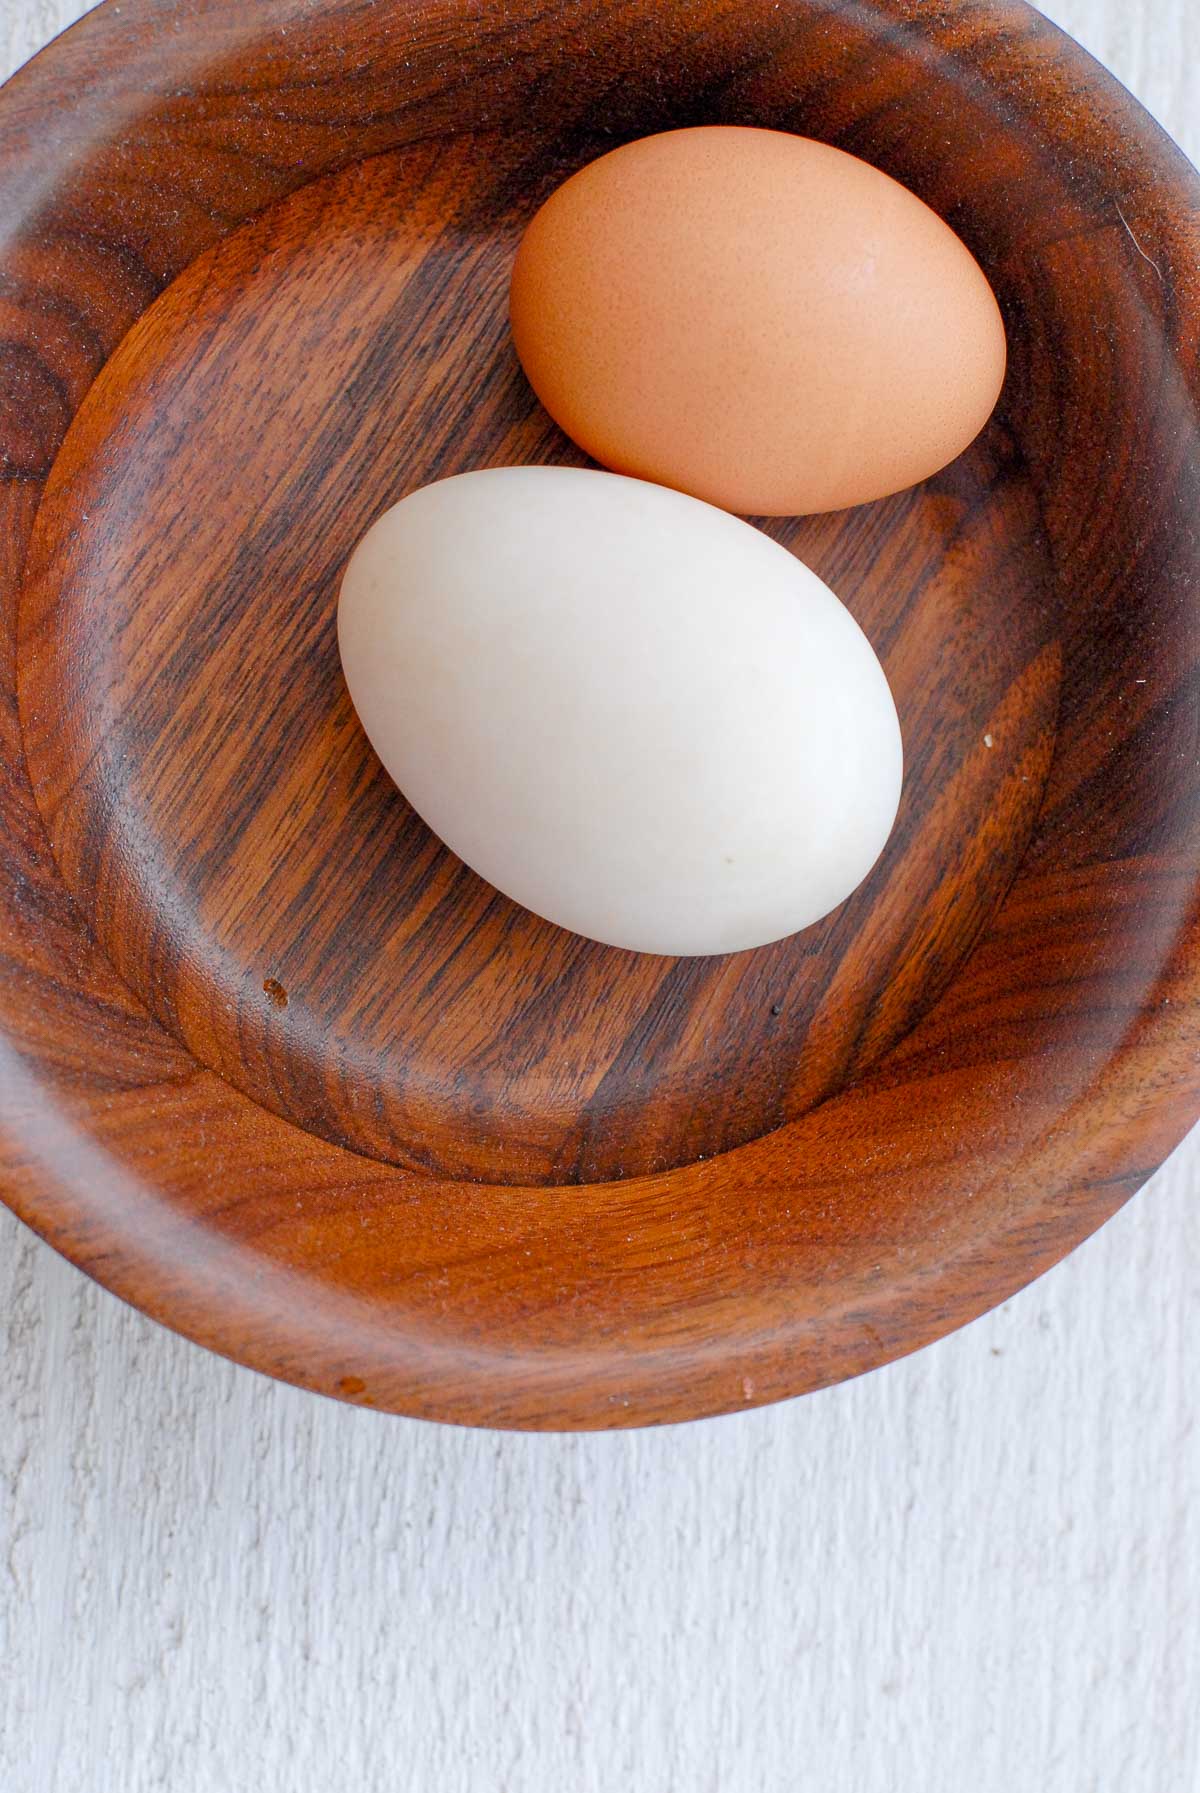 chicken egg and duck egg whole